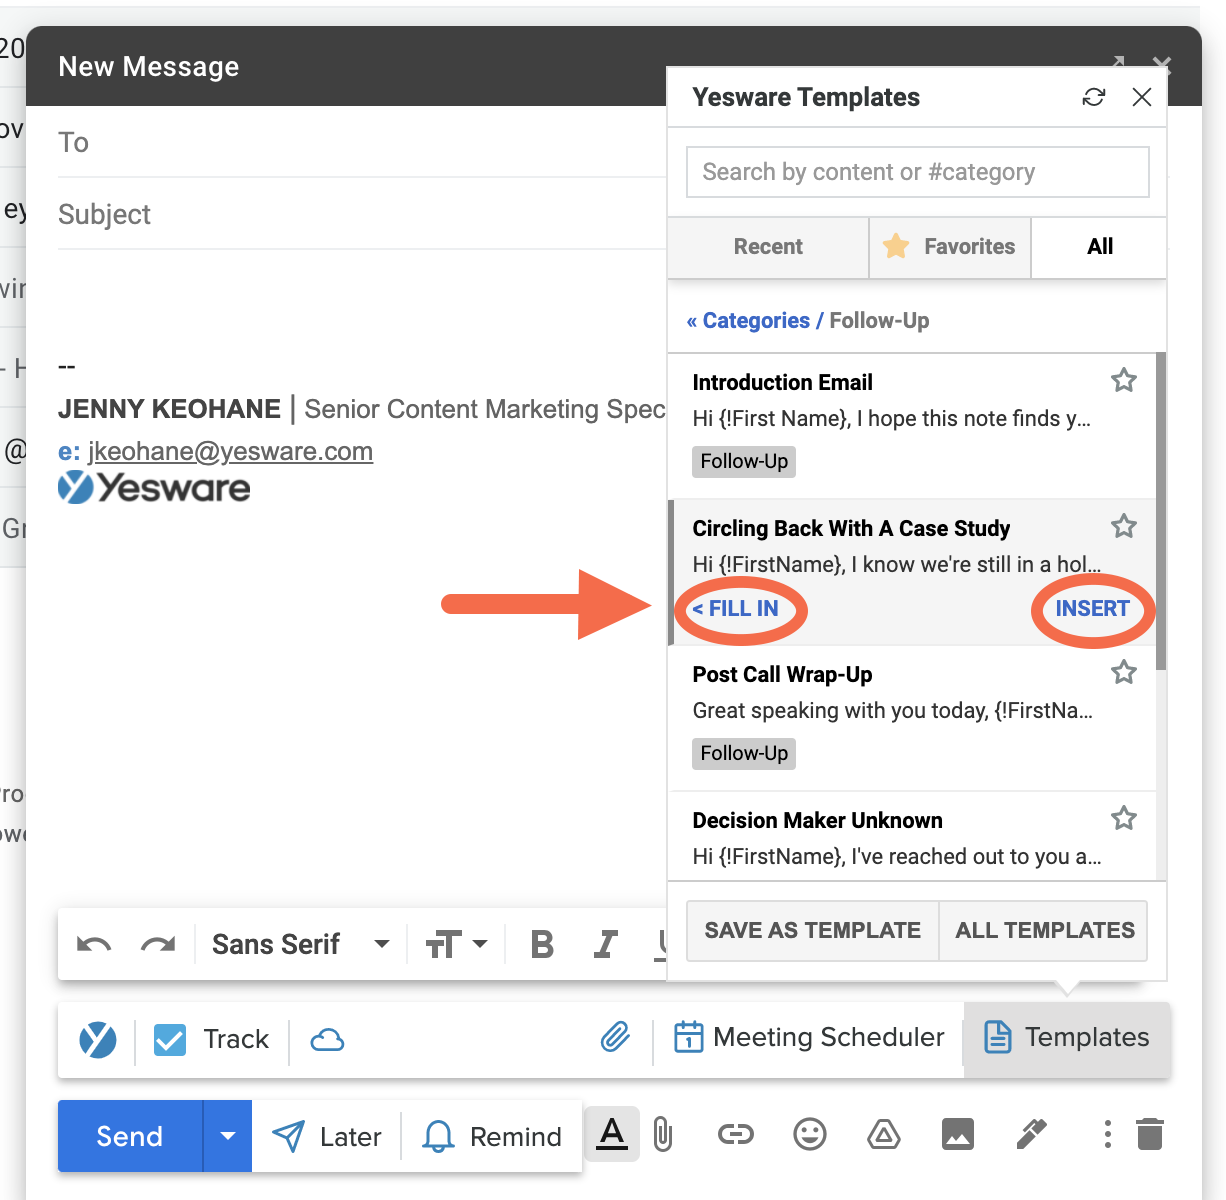 How to Insert Yesware Gmail Templates